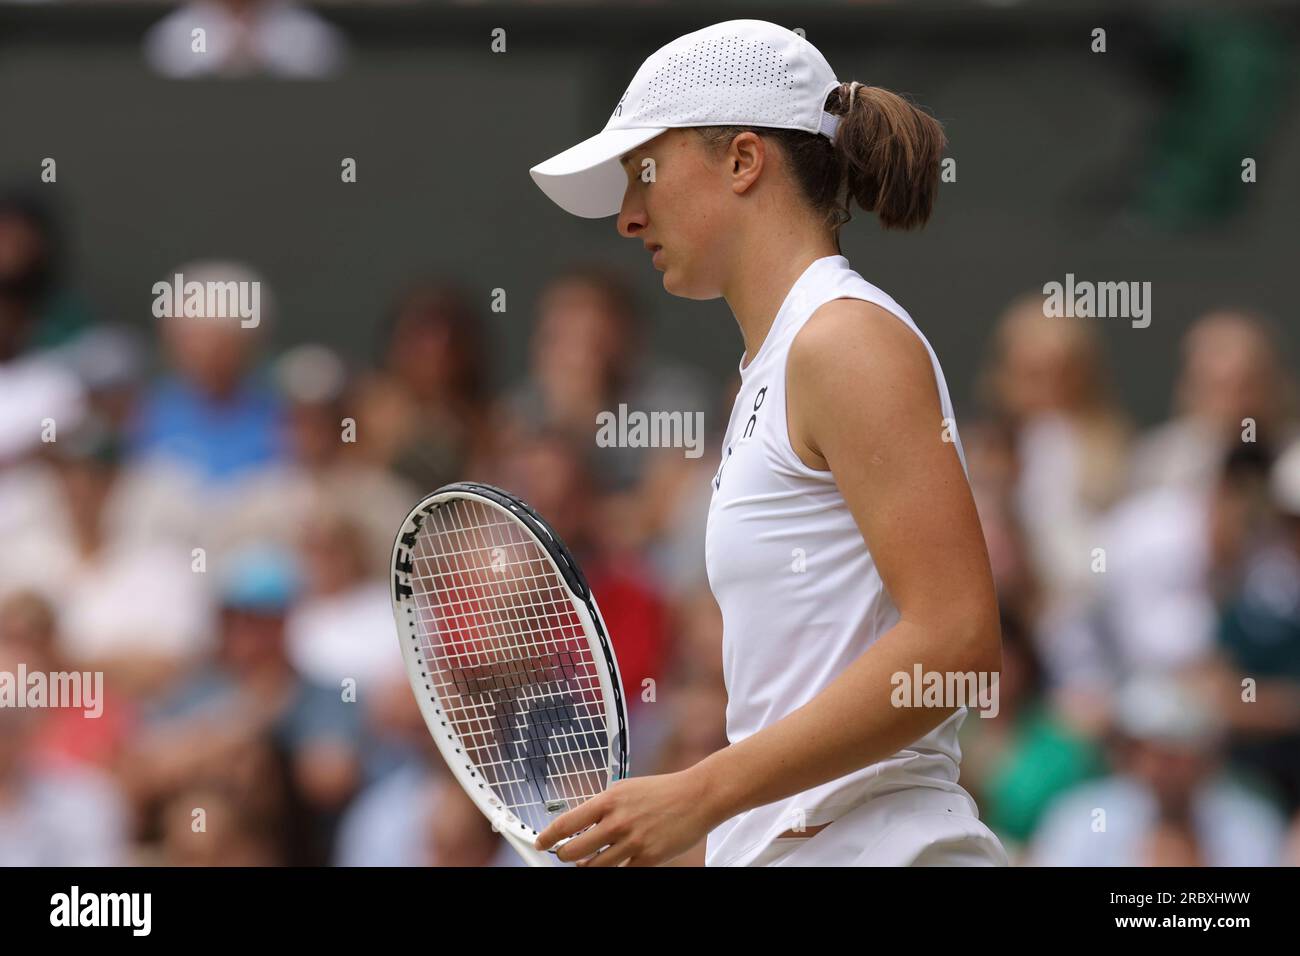 IGA SWIATEK of POLAND reacts during the Ladies Singles Quarter-finals match against ELINA SVITOLINA of UKRAINE in the Championships, Wimbledon at All England Lawn Tennis and Croquet Club in London, the United